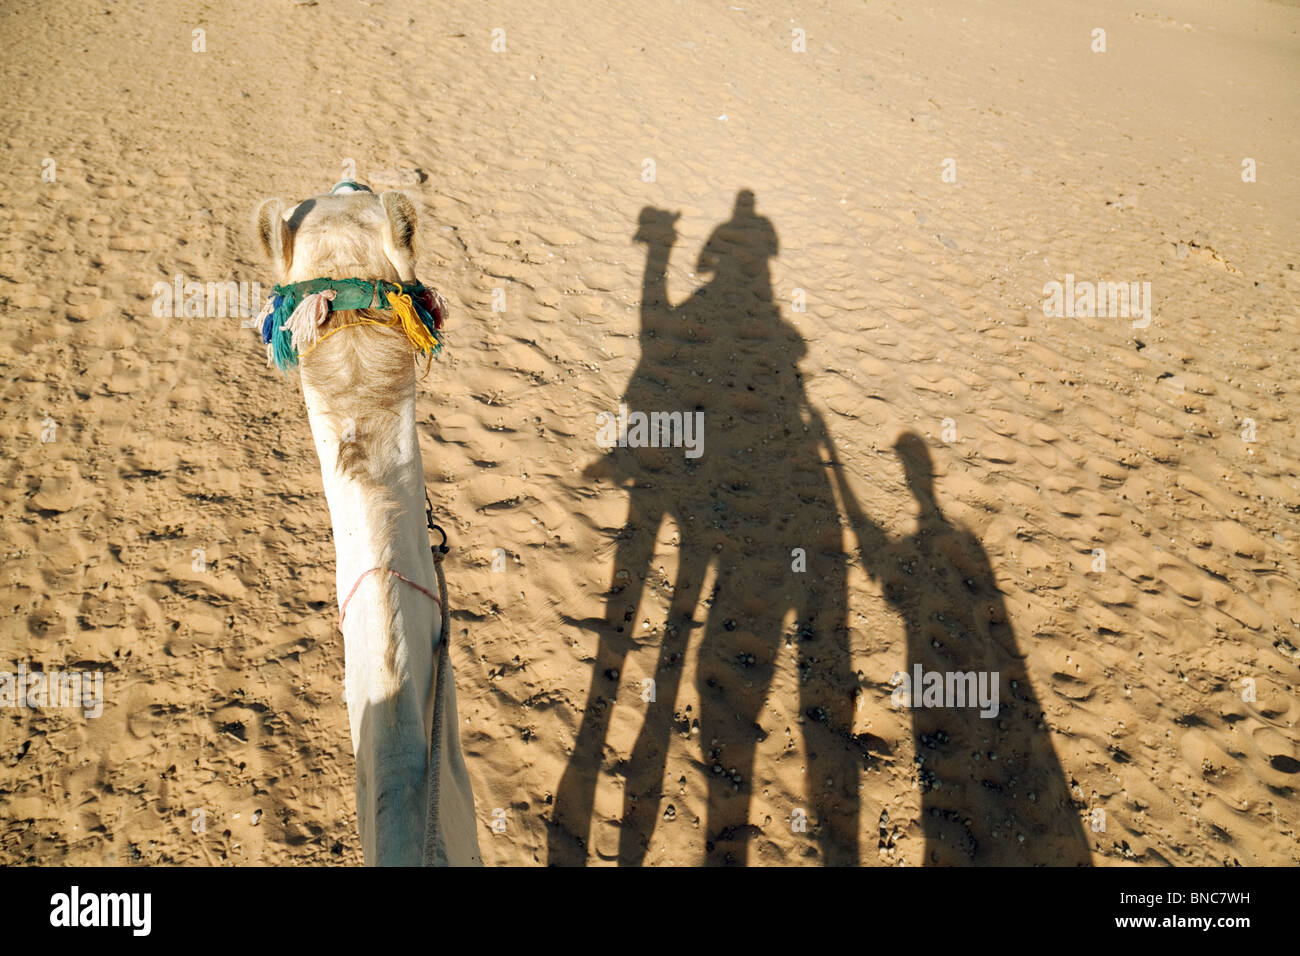 A camel, with the shadow of its rider and handler, The egyptian desert near Aswan, Upper Egypt Africa Stock Photo